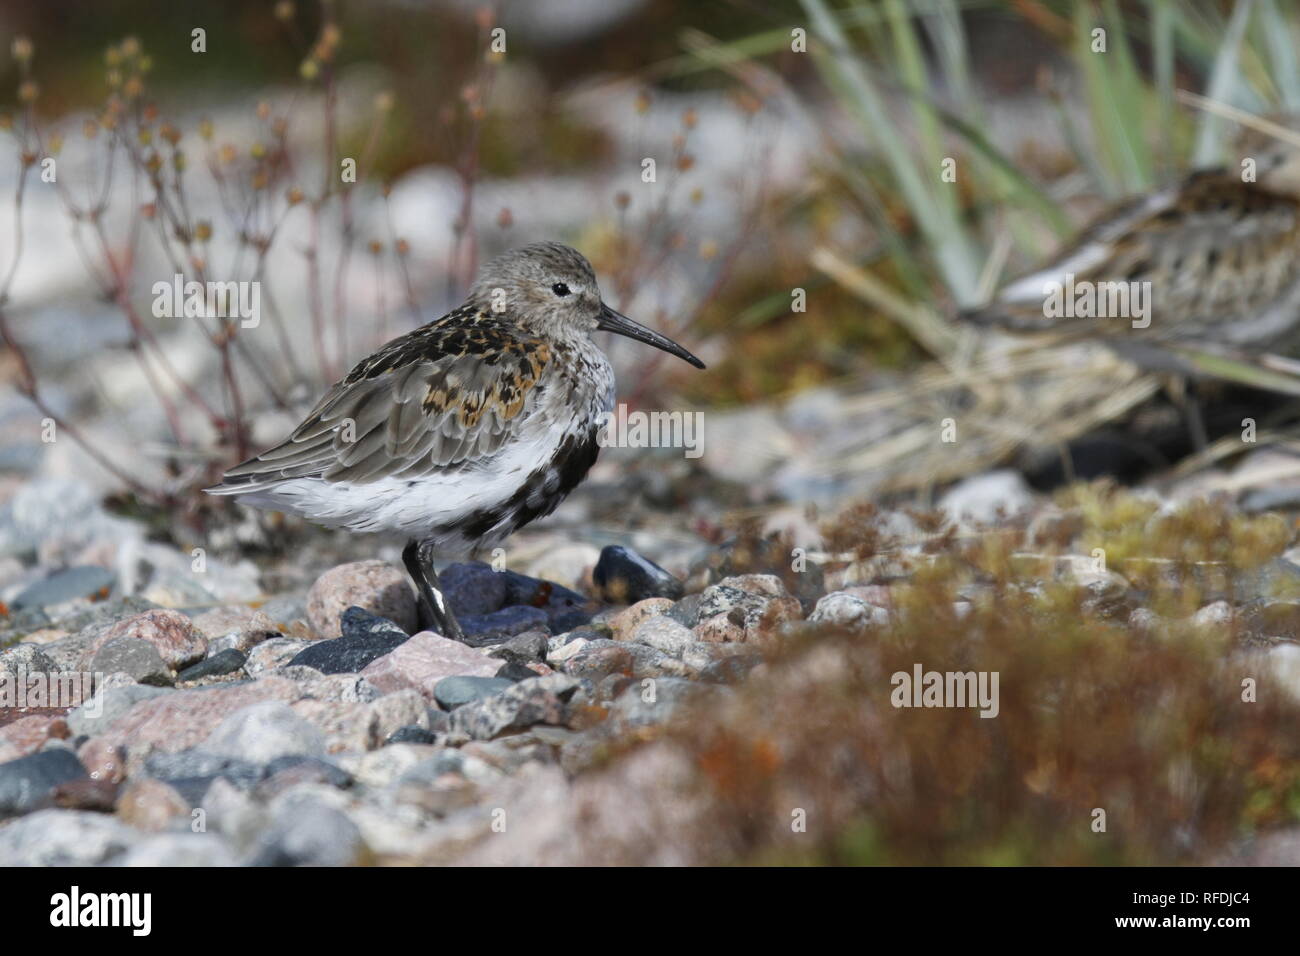 Dunlin (Calidris alpina), a medium sized sandpiper and shorebird standing sidewise with plants in the background Stock Photo